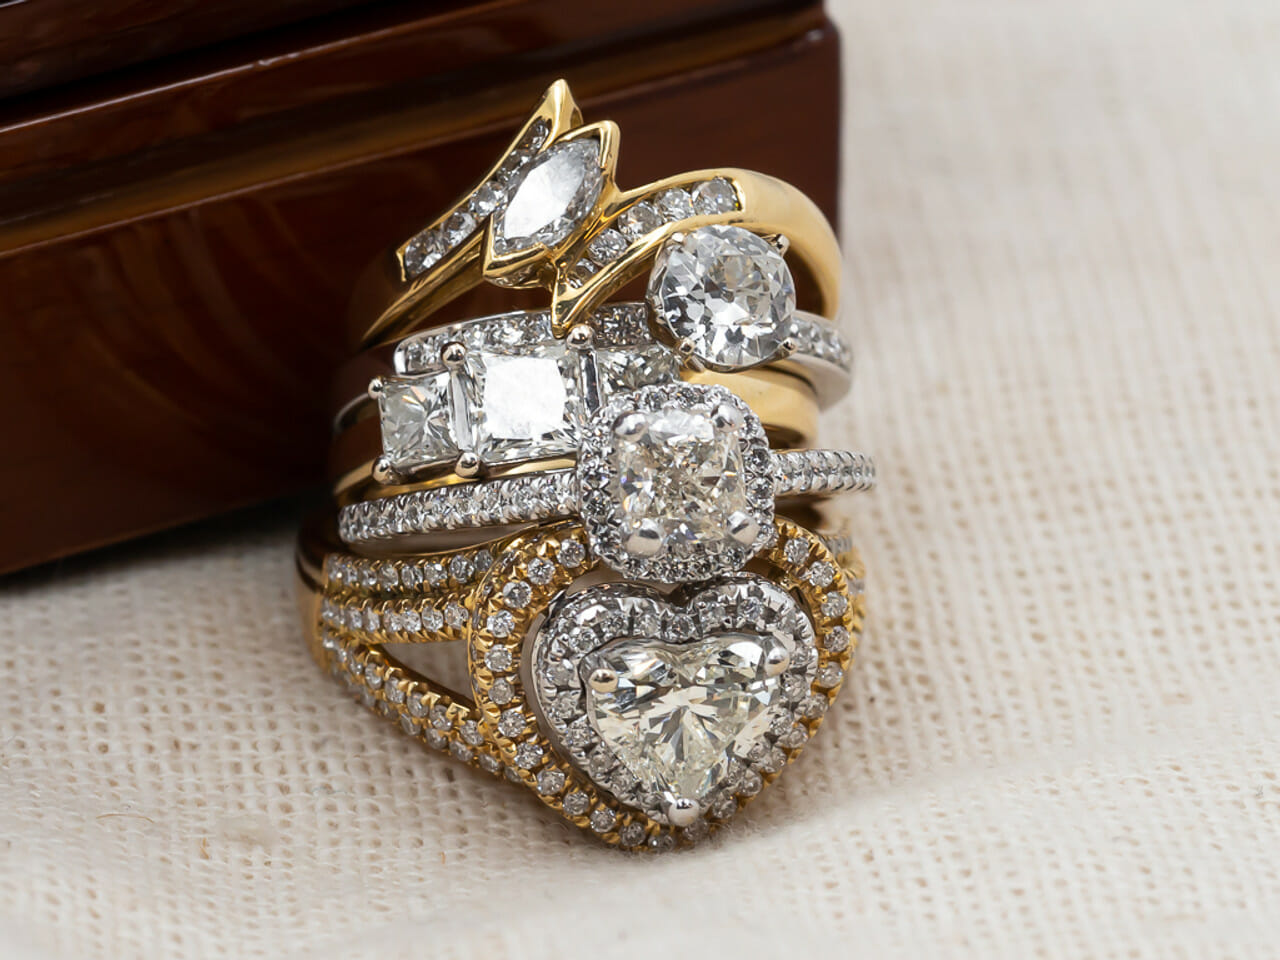 Our Guide To The 4 C’s of Diamonds